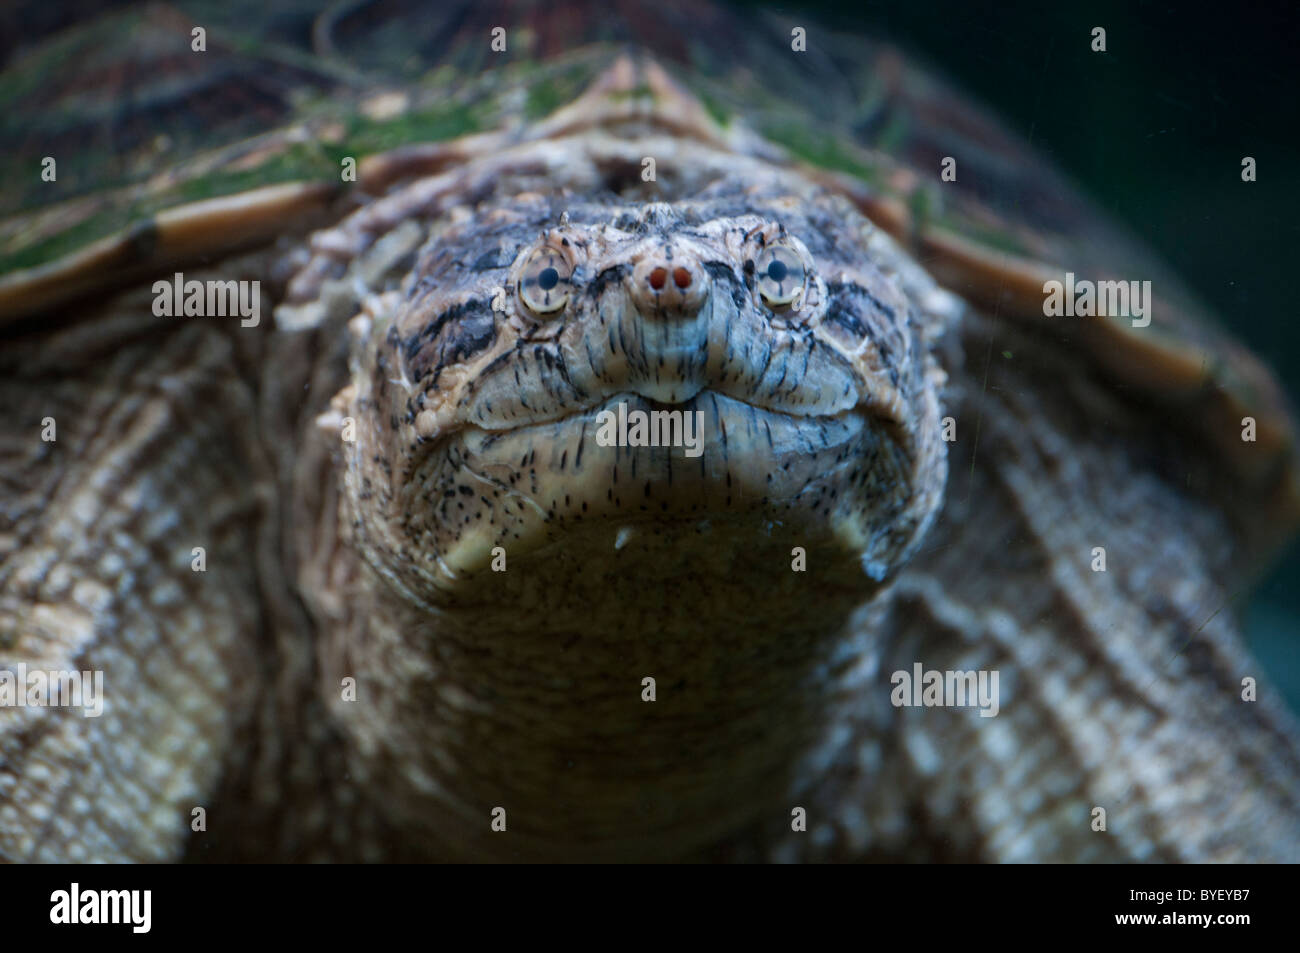 Close-up of a Common Snapping Turtle. Stock Photo